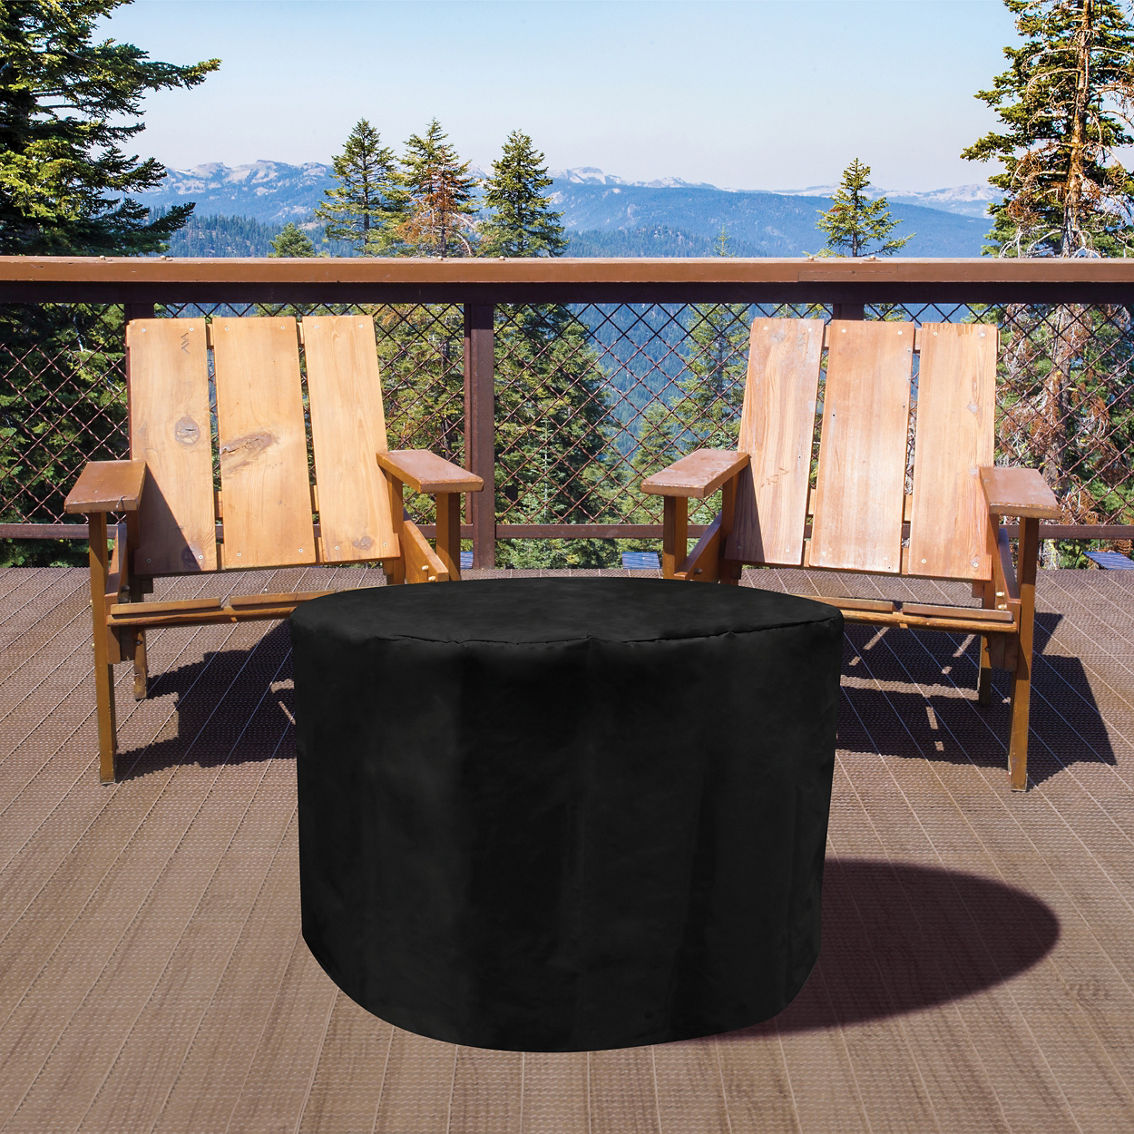 Sunbeam Pioneer Brown Thermoset Resin Fire Pit - Image 4 of 6